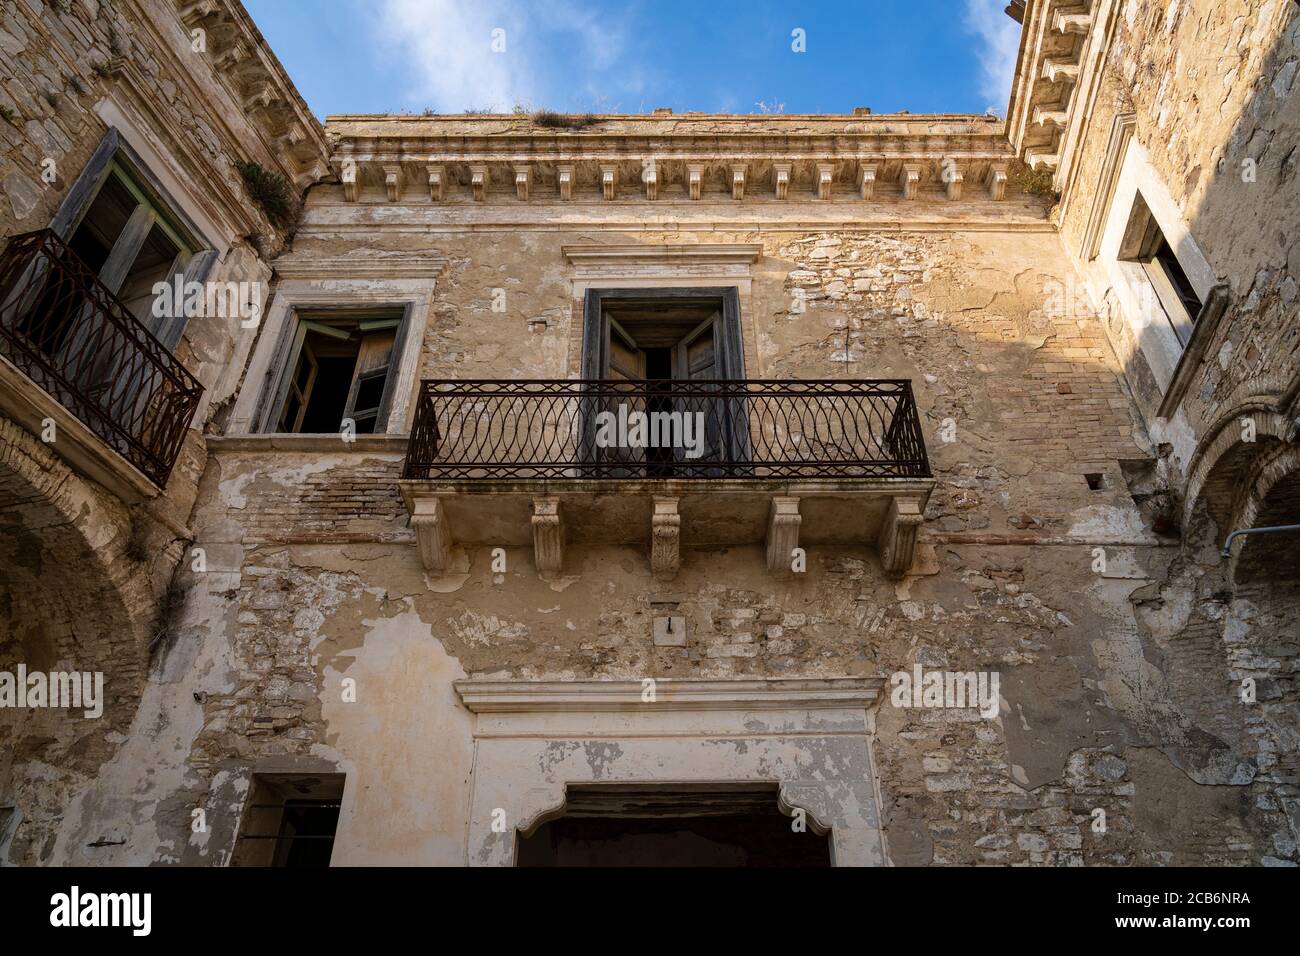 The ghost town of Craco, Matera province, Basilicata, Italy, Europe. Stock Photo